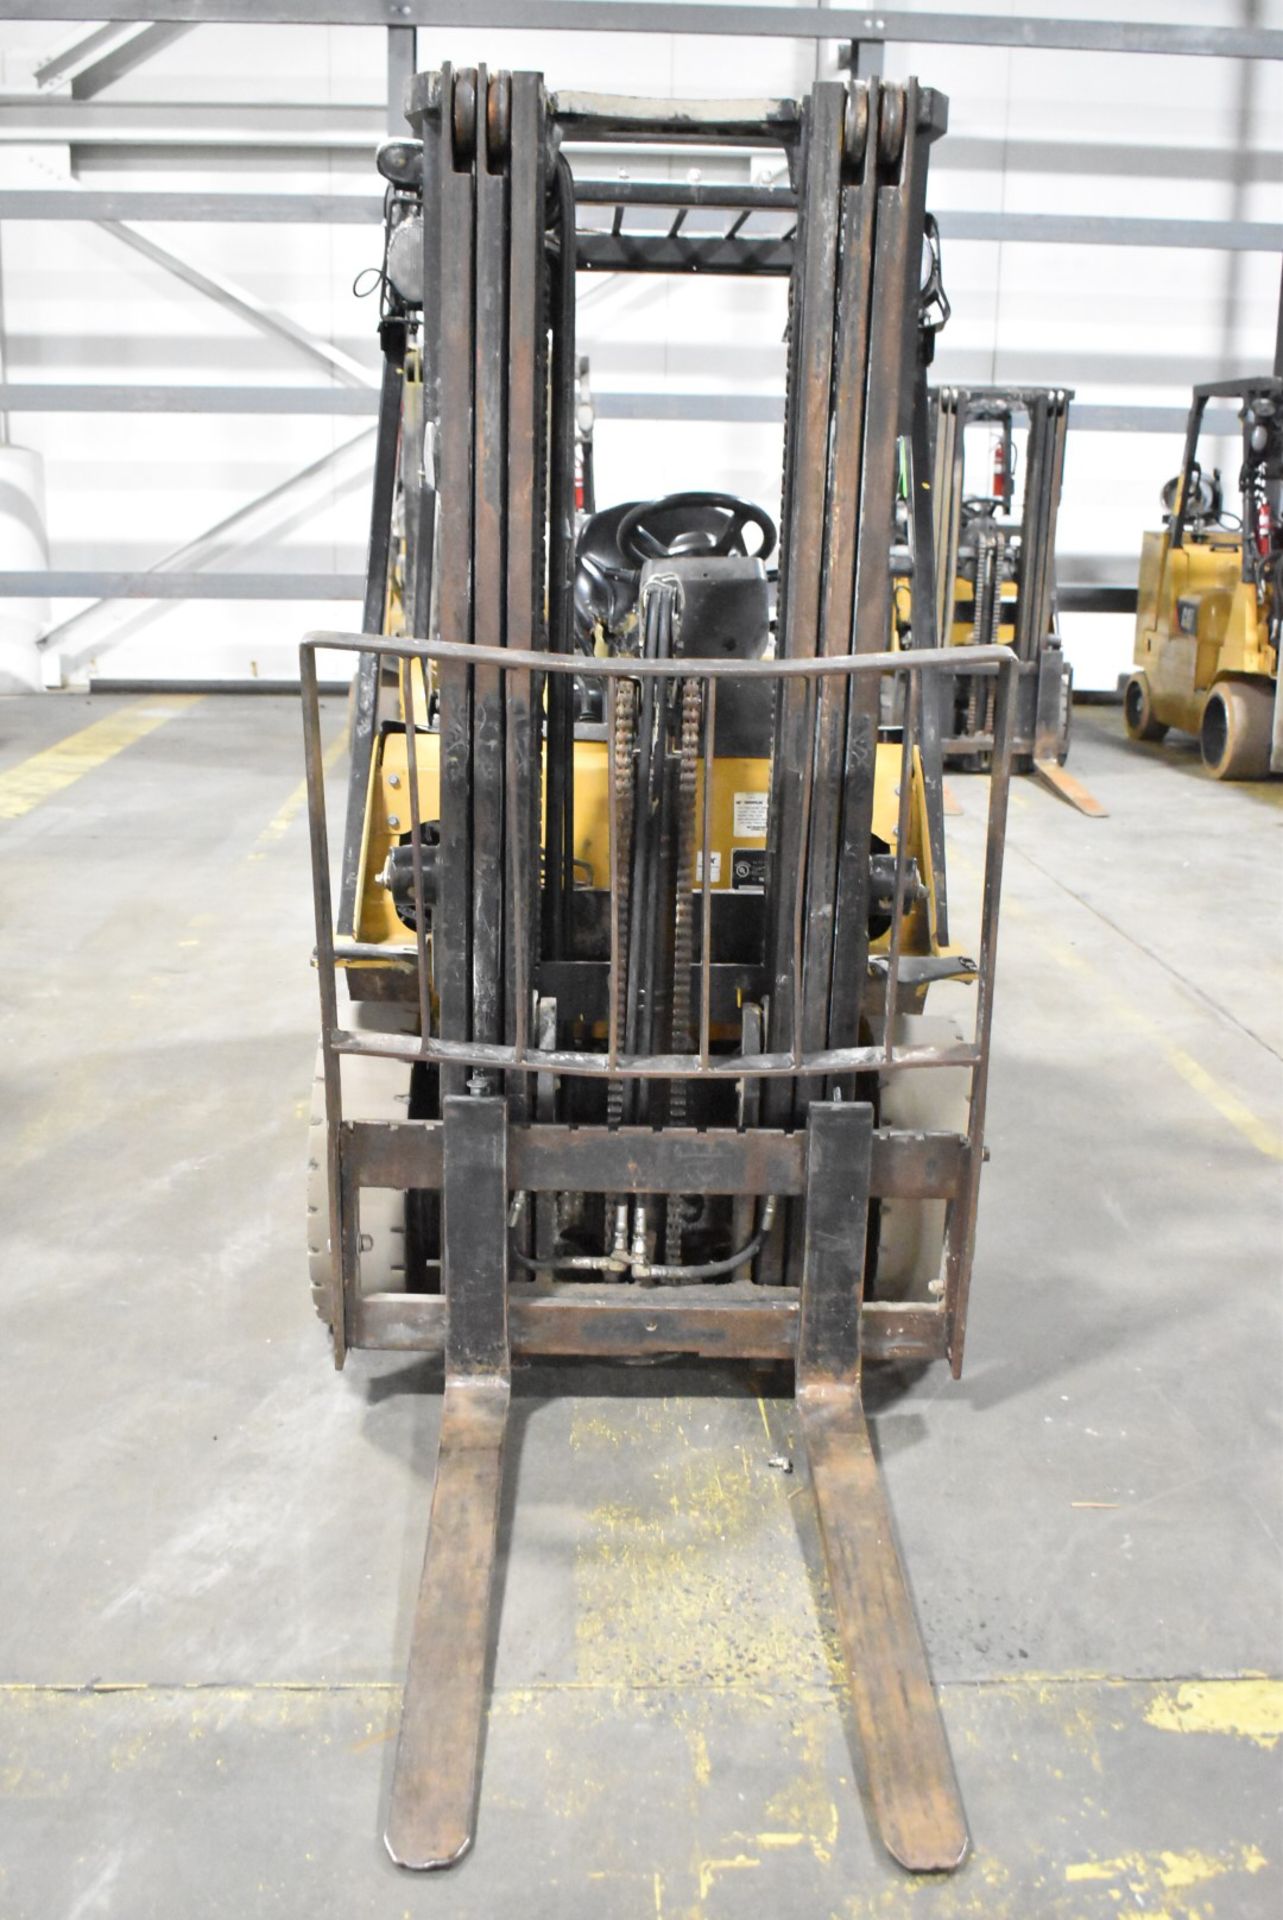 CATERPILLAR P5000-LP 4,500 LBS. CAPACITY LPG FORKLIFT WITH 188" MAX VERTICAL REACH, 3-STAGE HIGH - Image 2 of 7